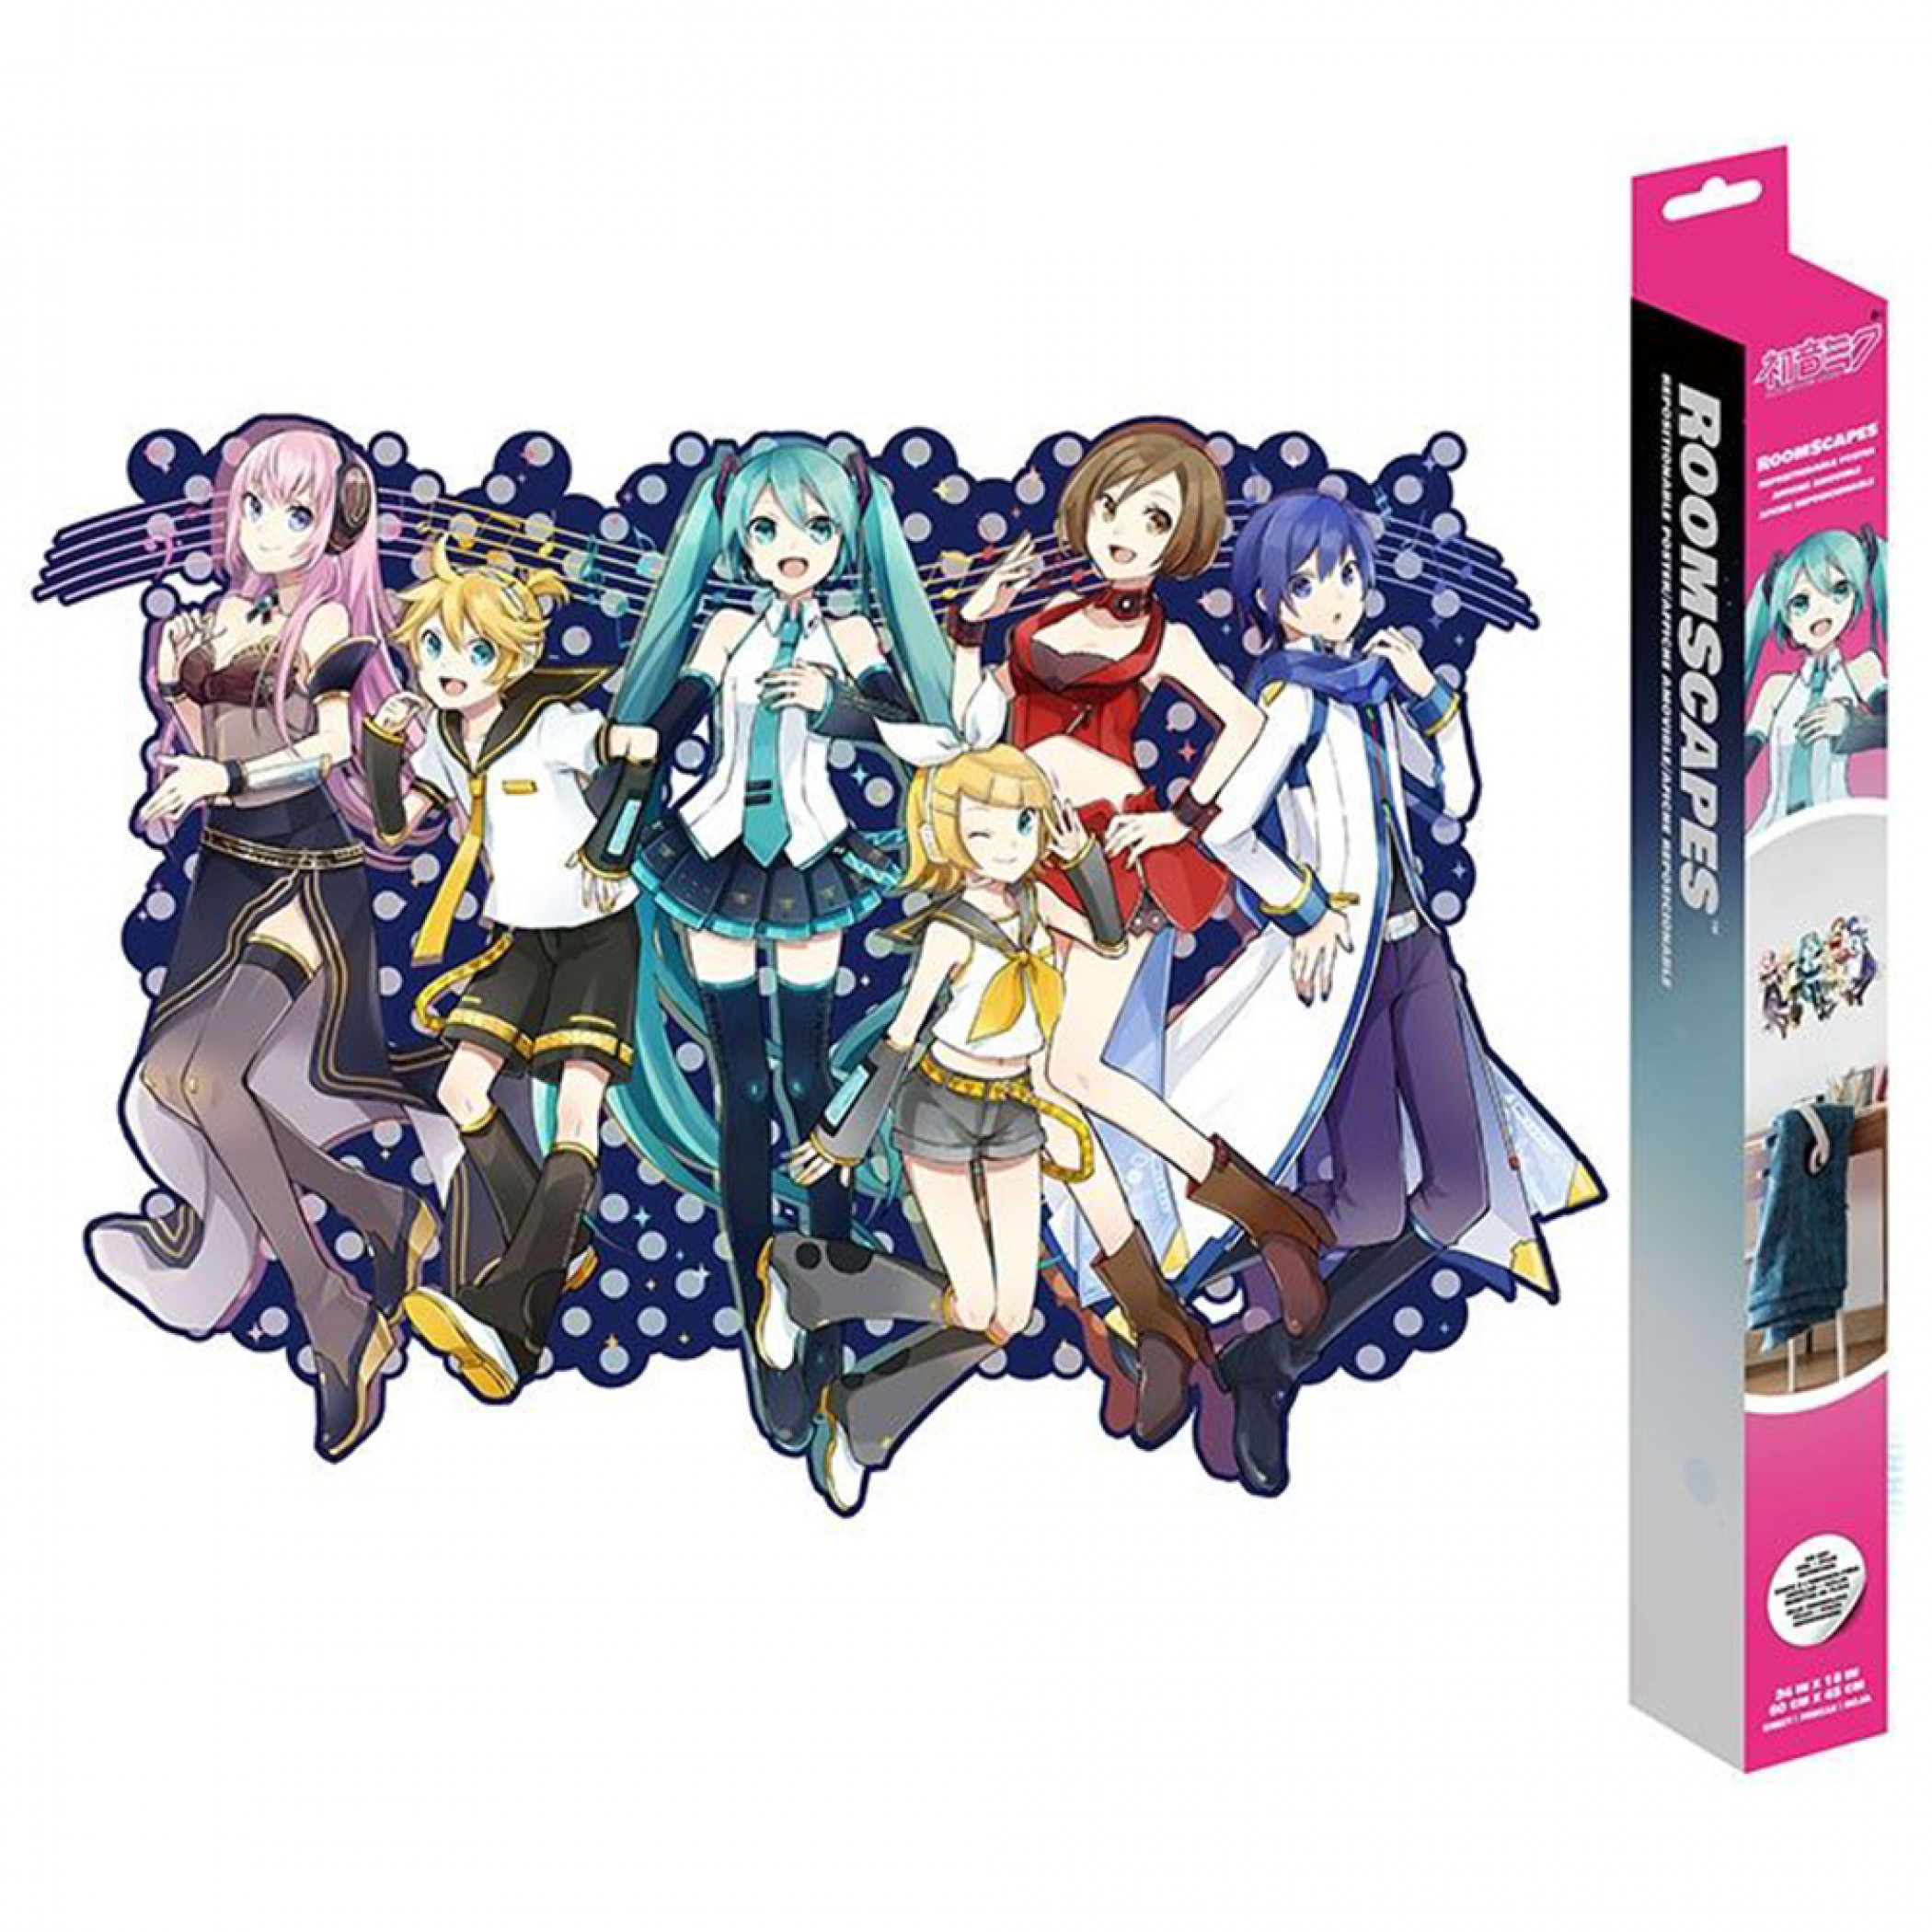 Hatsune Miku Characters RoomScapes Wall Decal